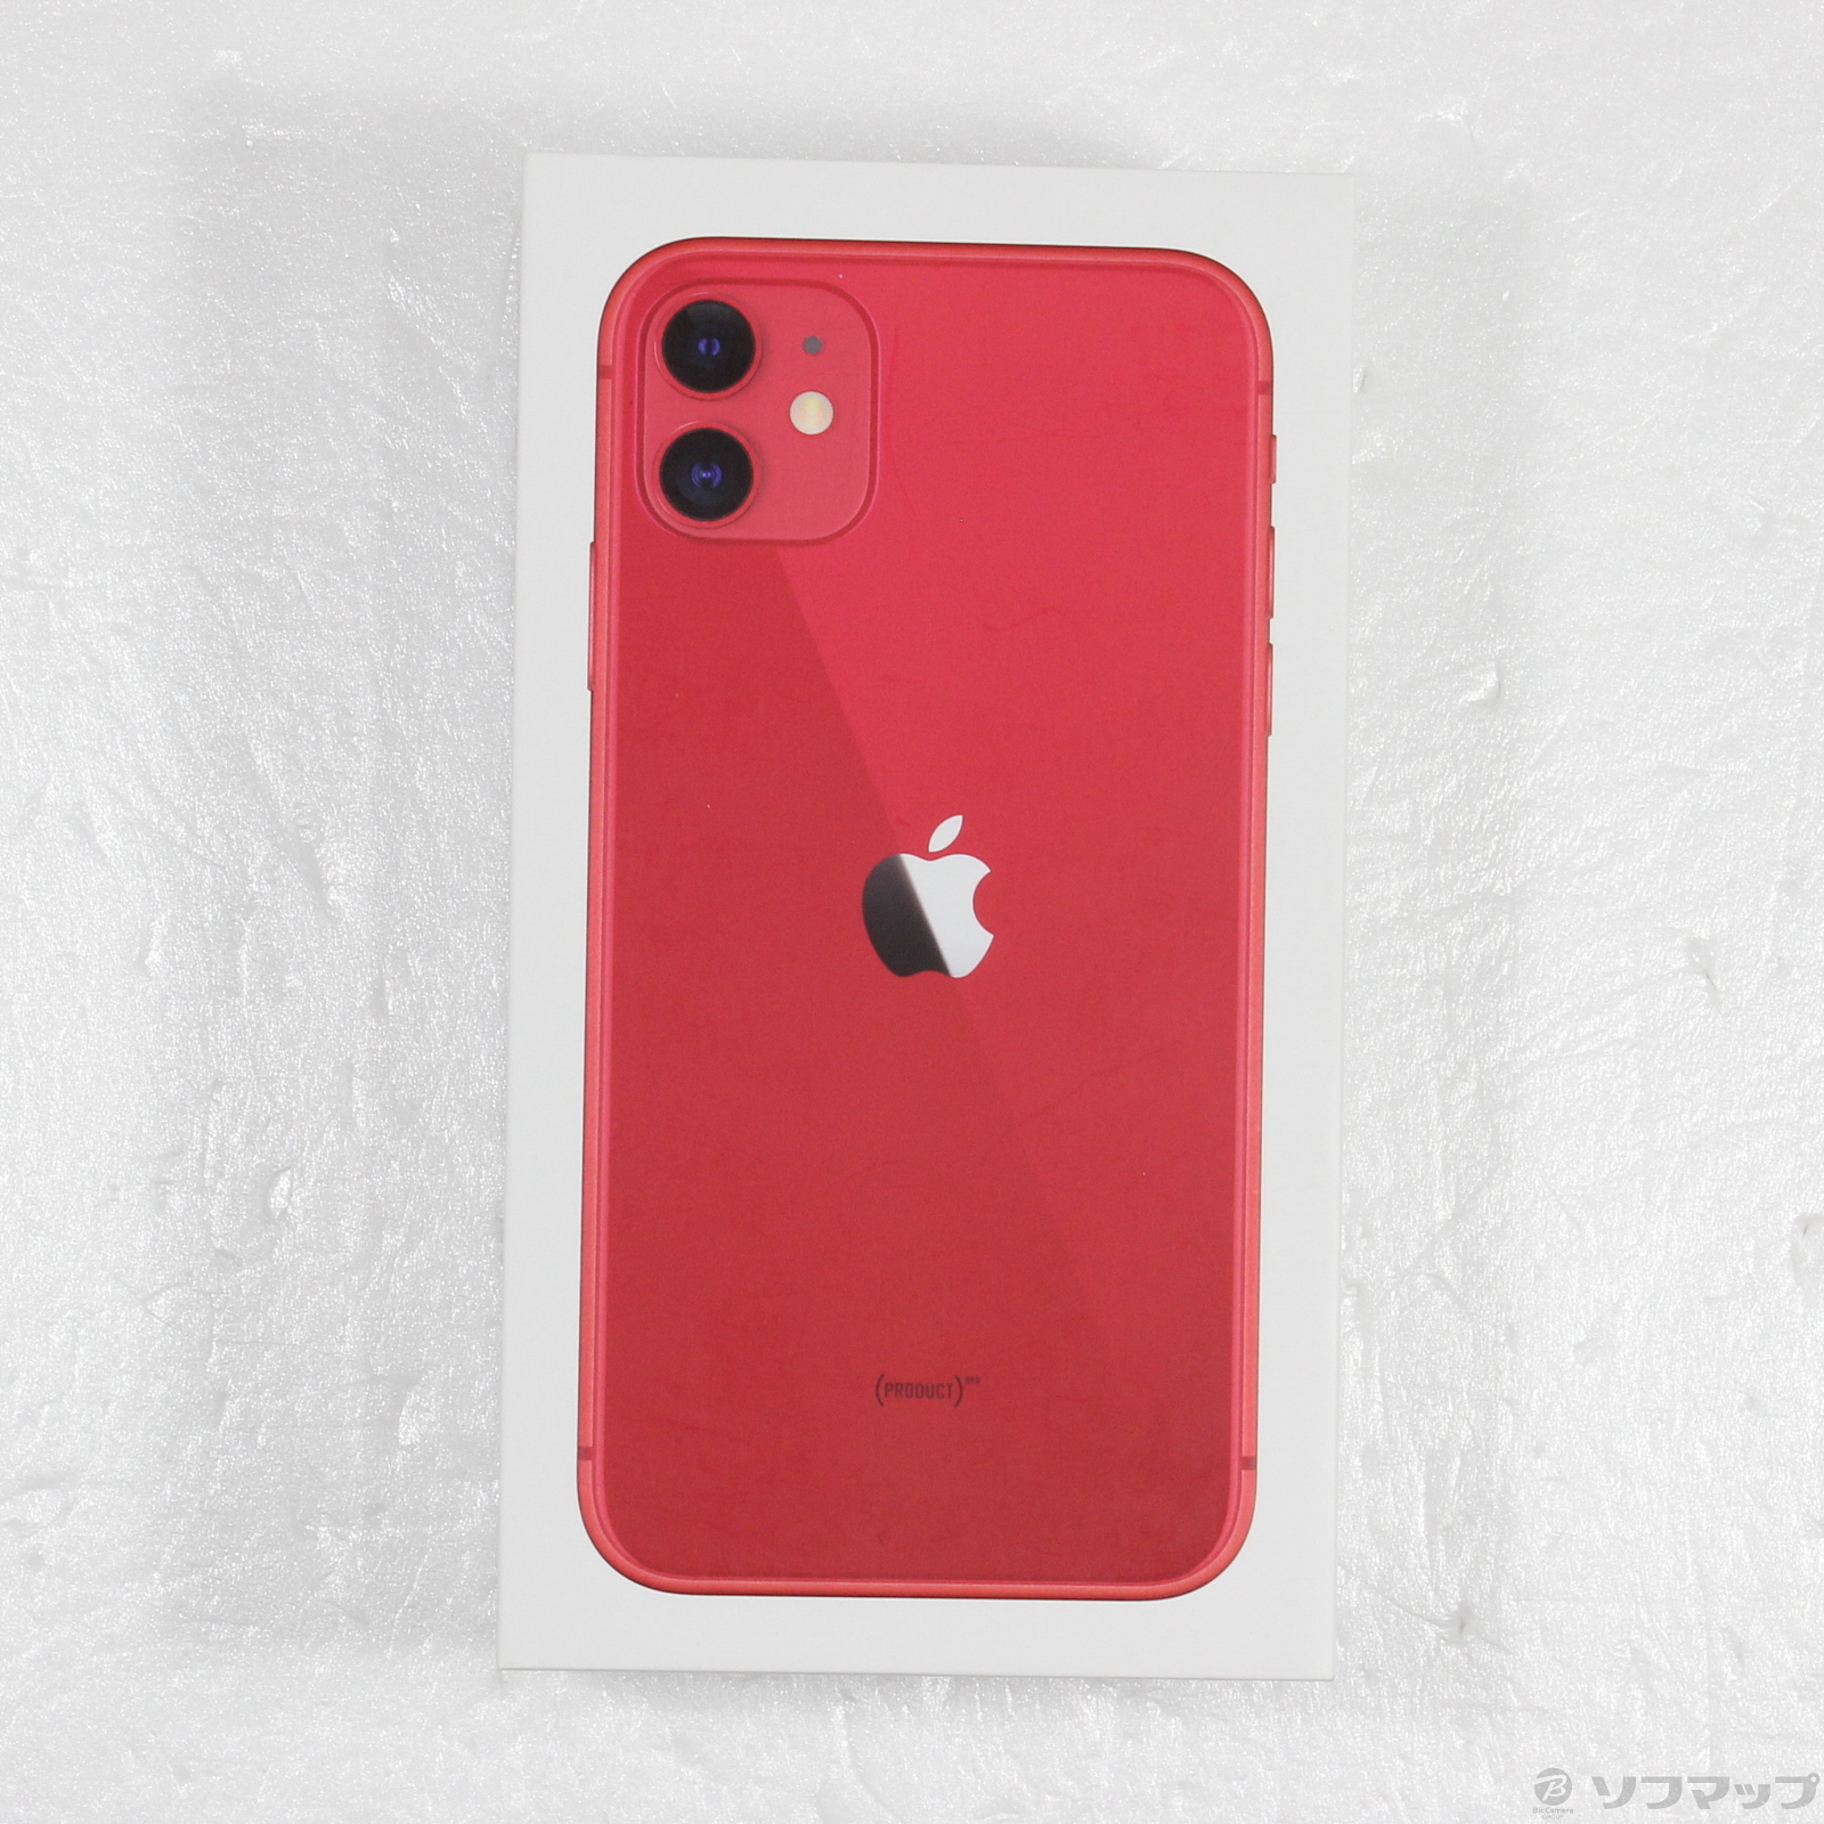 iPhone 11 (PRODUCT)RED 64 GB Softbank